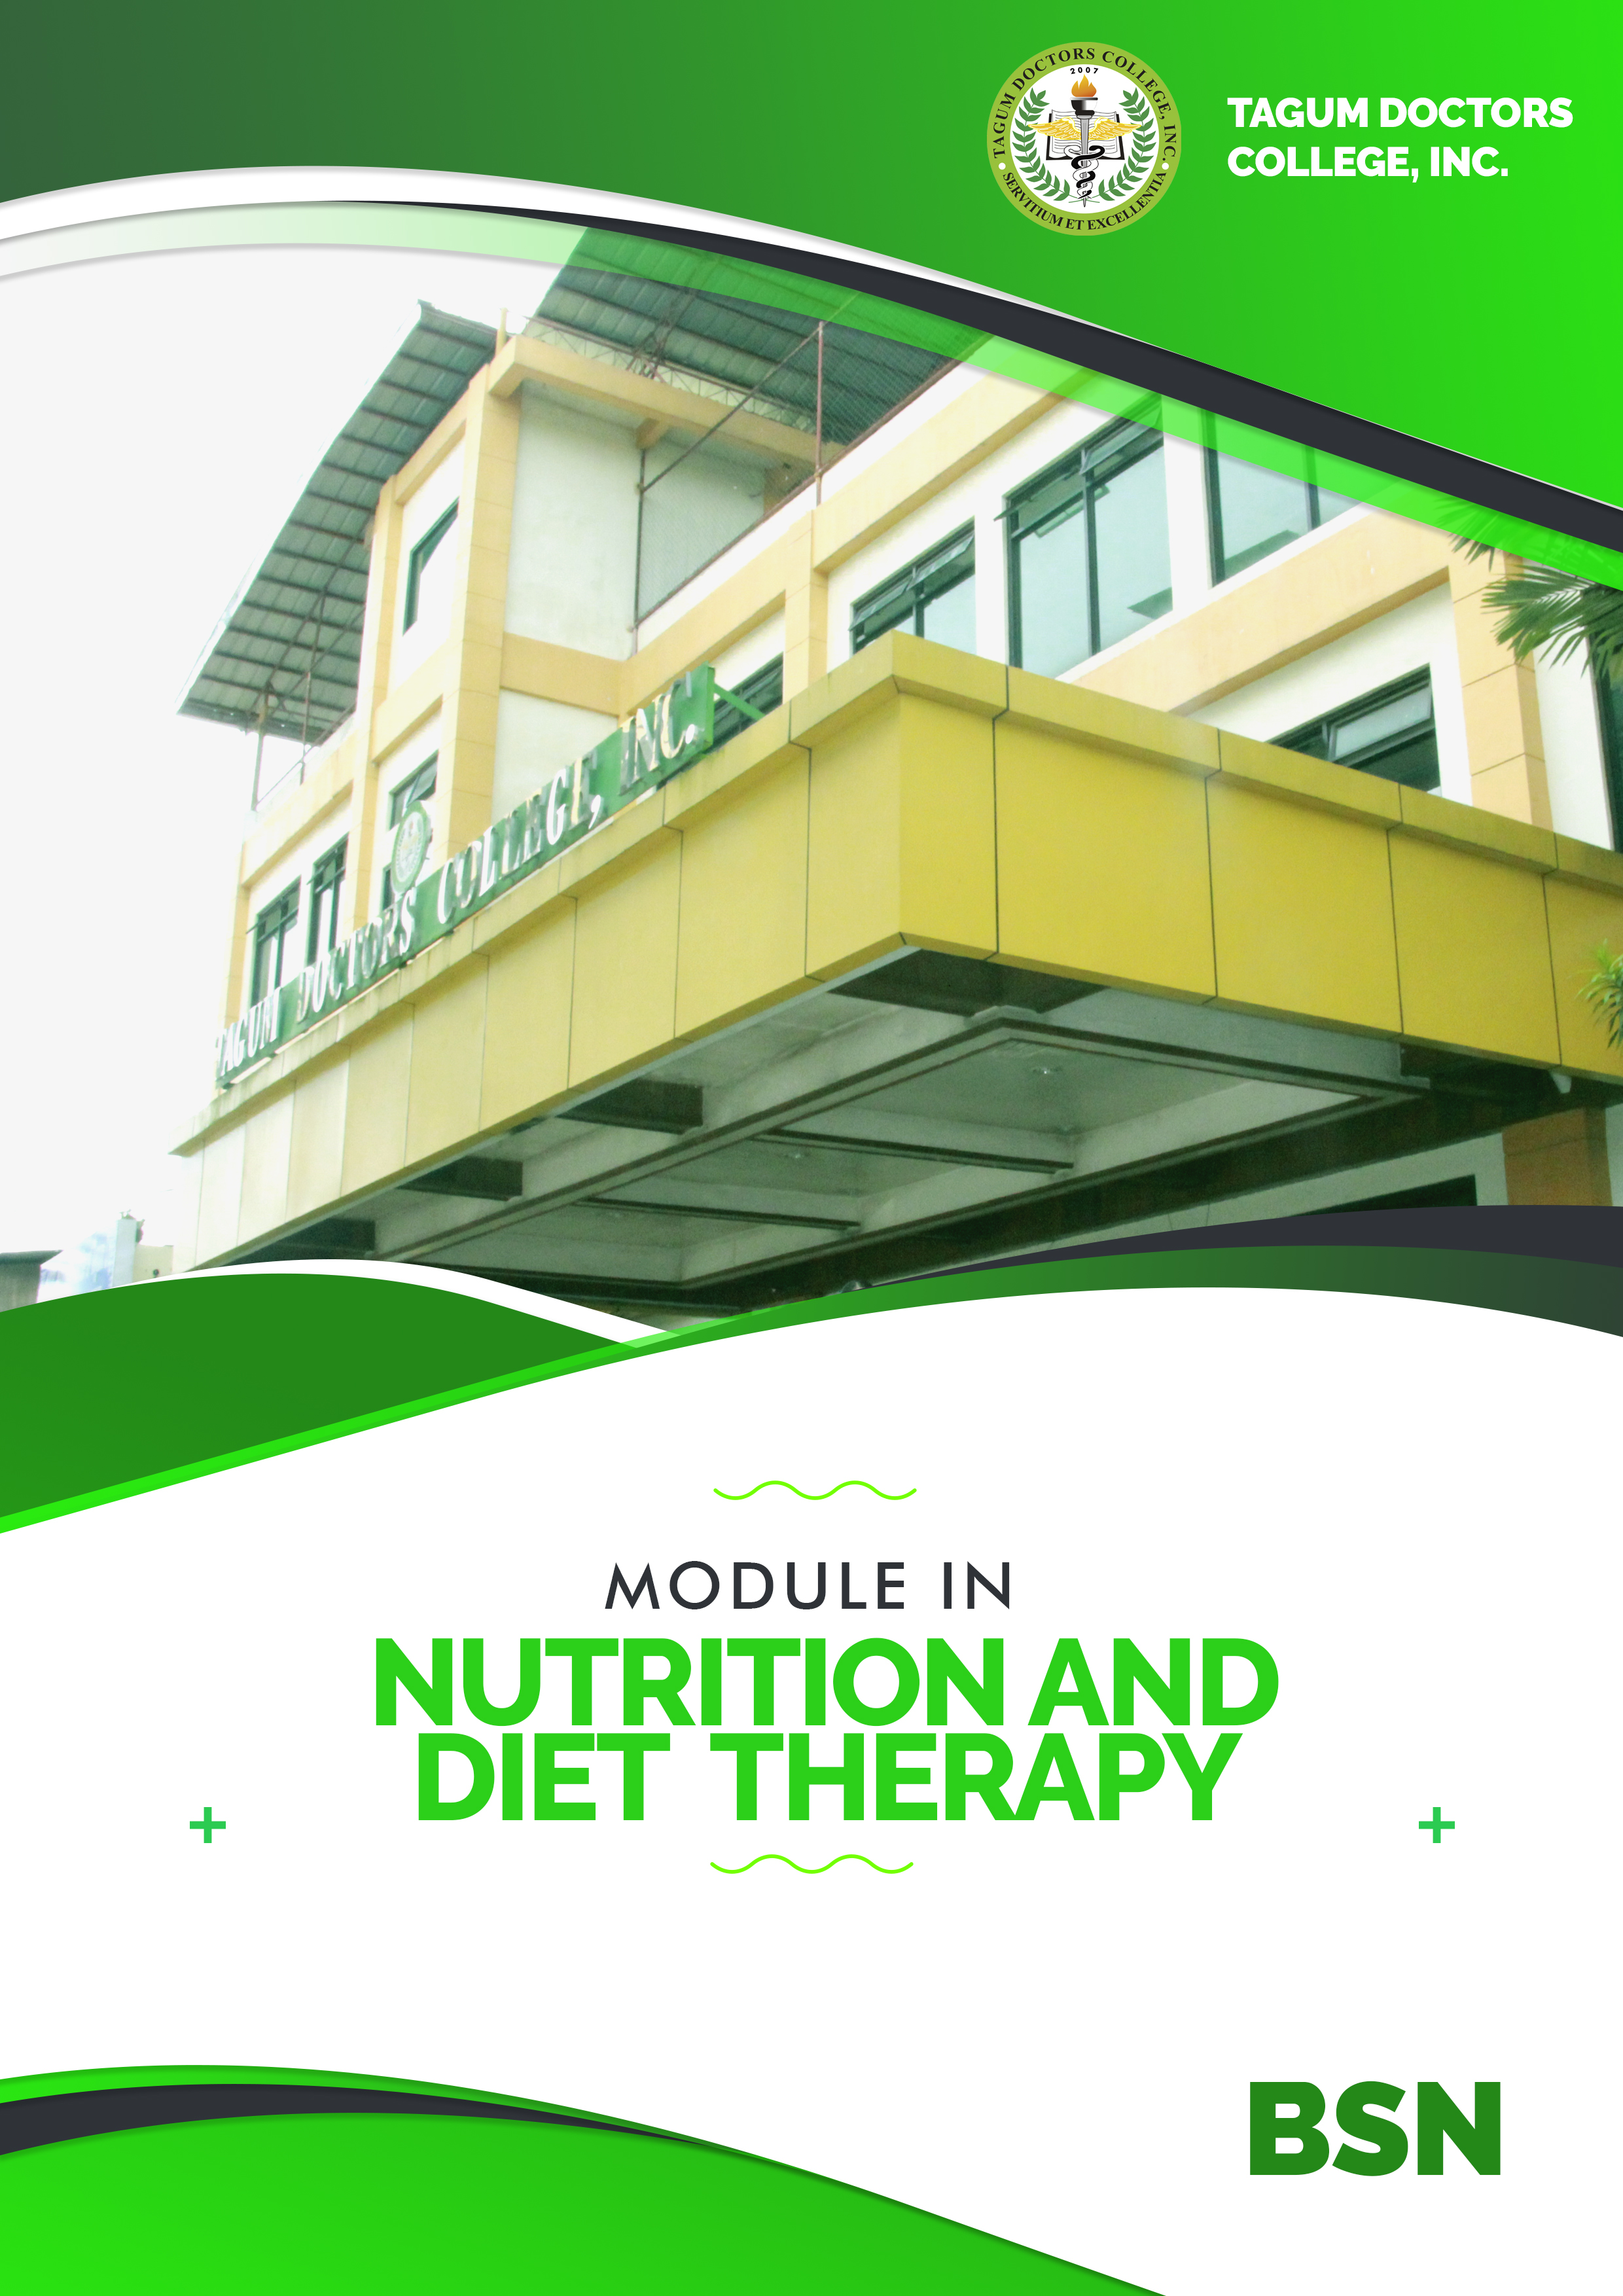 Nutrition and Diet Therapy - BSN 2B